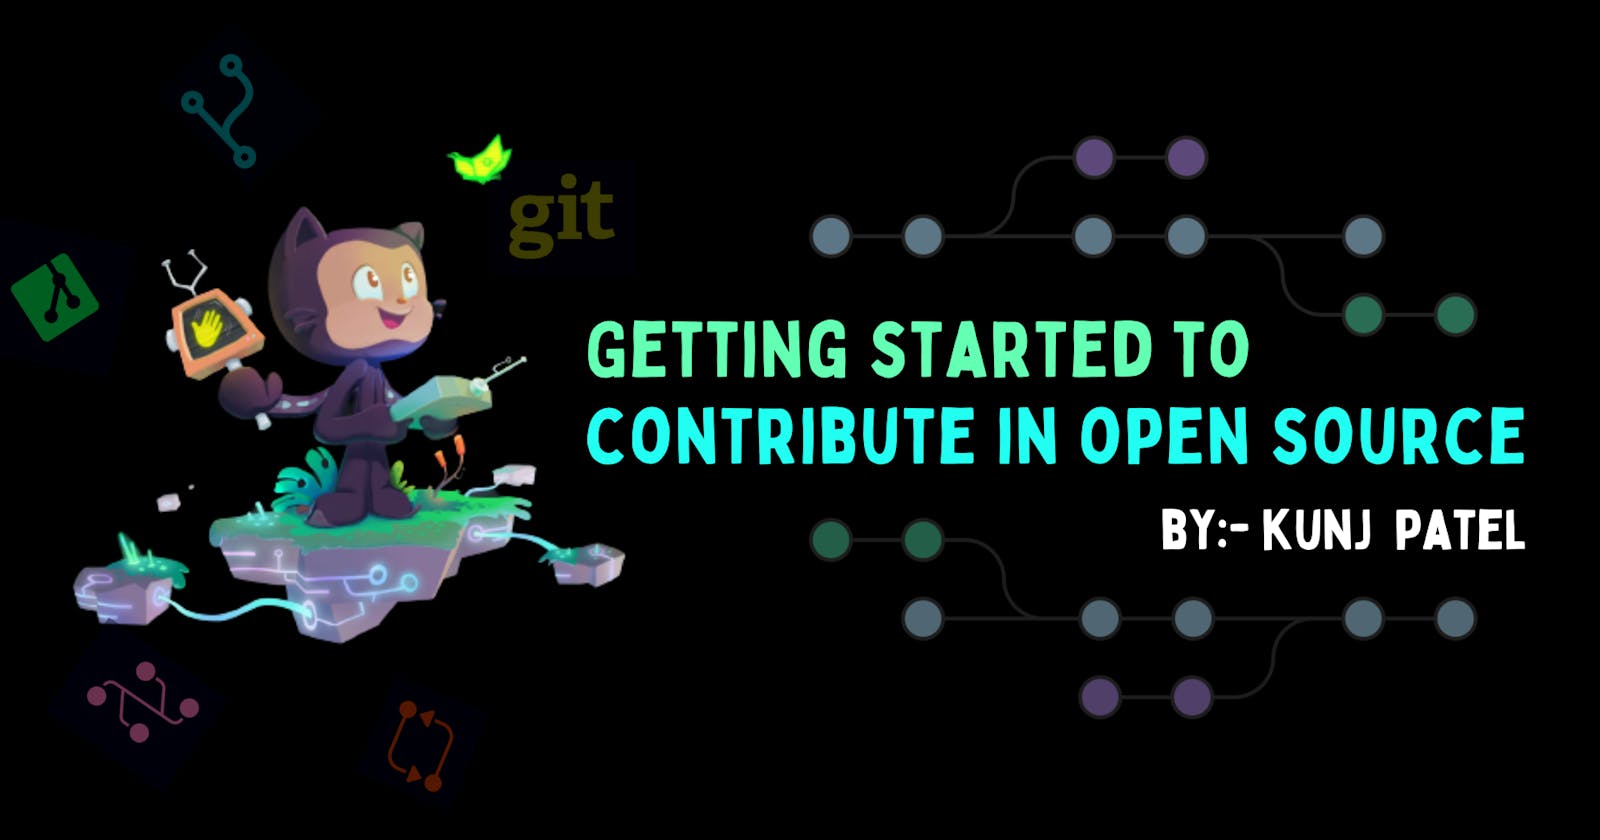 Getting started with contributing to open source